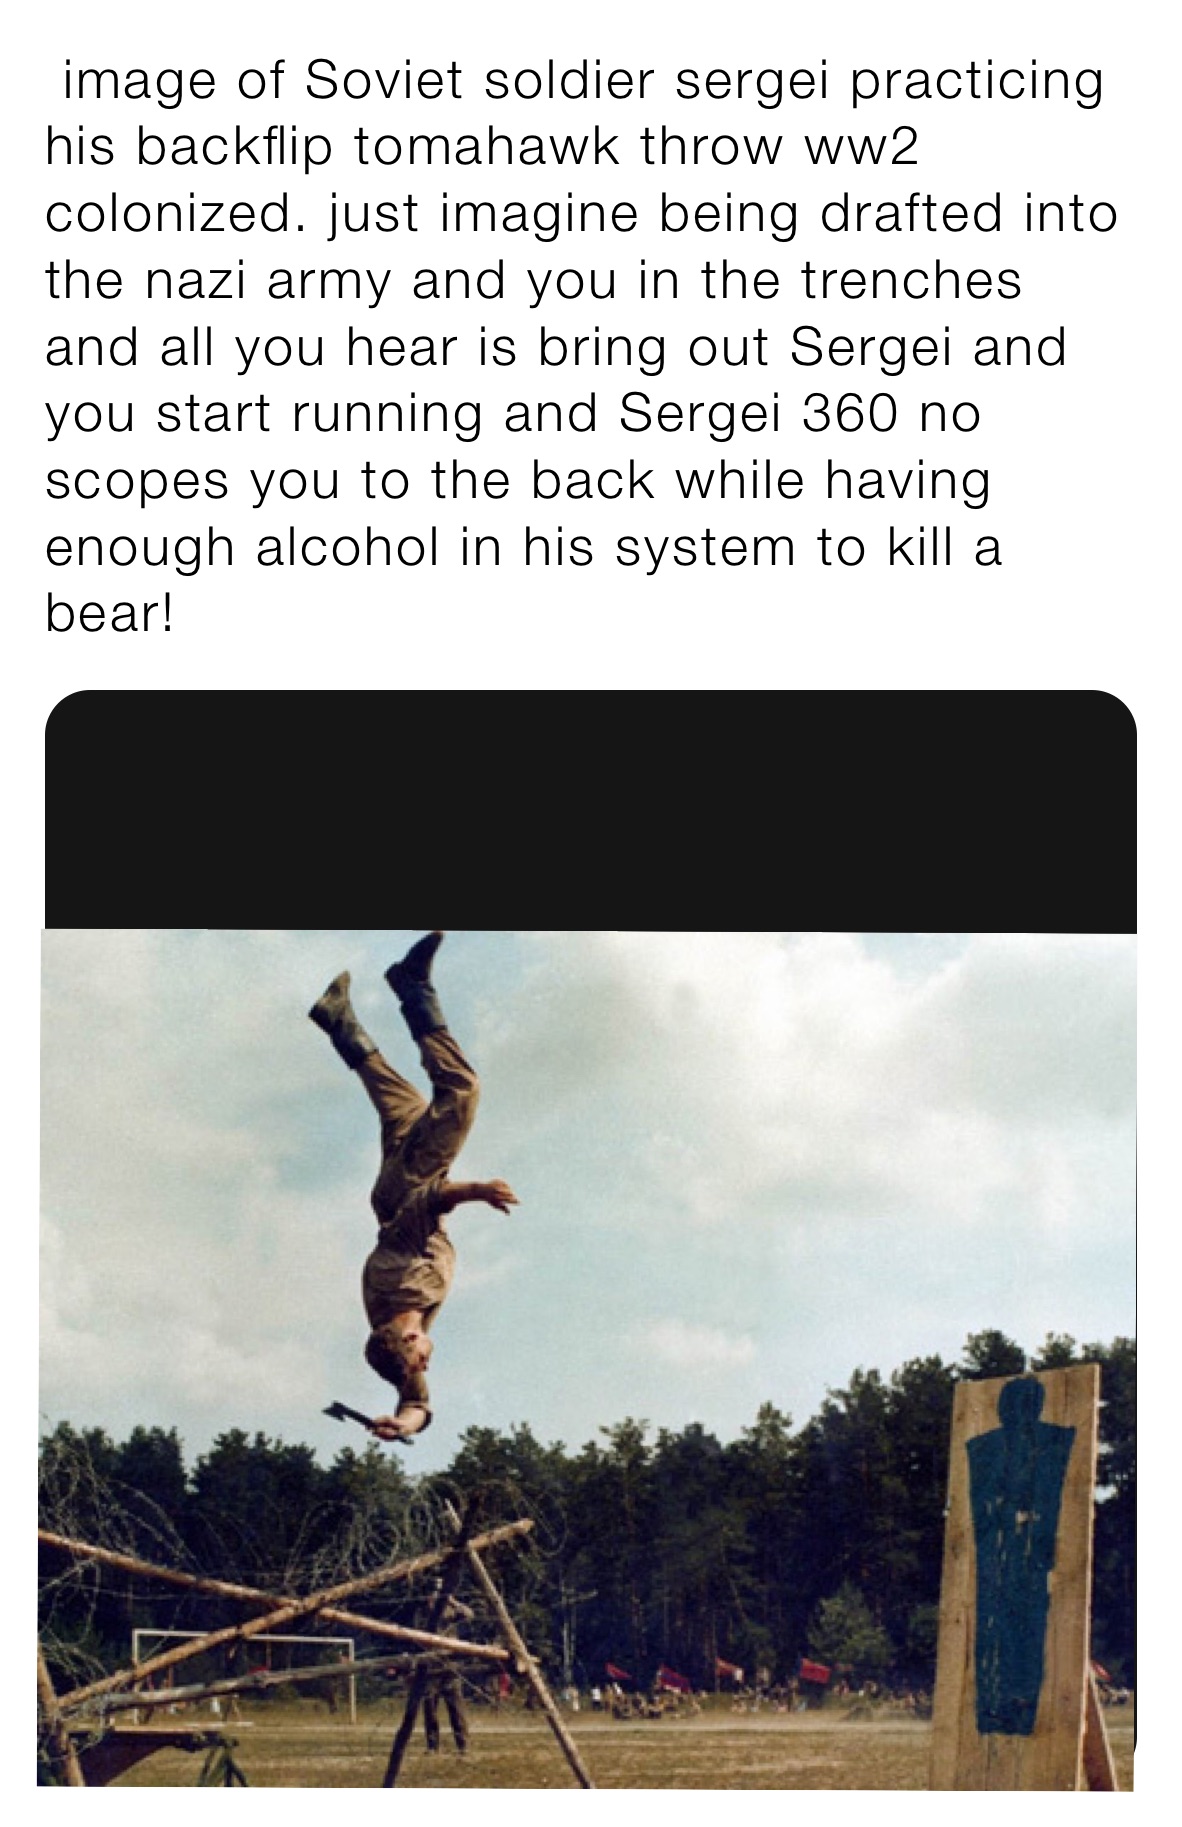  image of Soviet soldier sergei practicing his backflip tomahawk throw ww2 colonized. just imagine being drafted into the nazi army and you in the trenches and all you hear is bring out Sergei and you start running and Sergei 360 no scopes you to the back while having enough alcohol in his system to kill a bear!